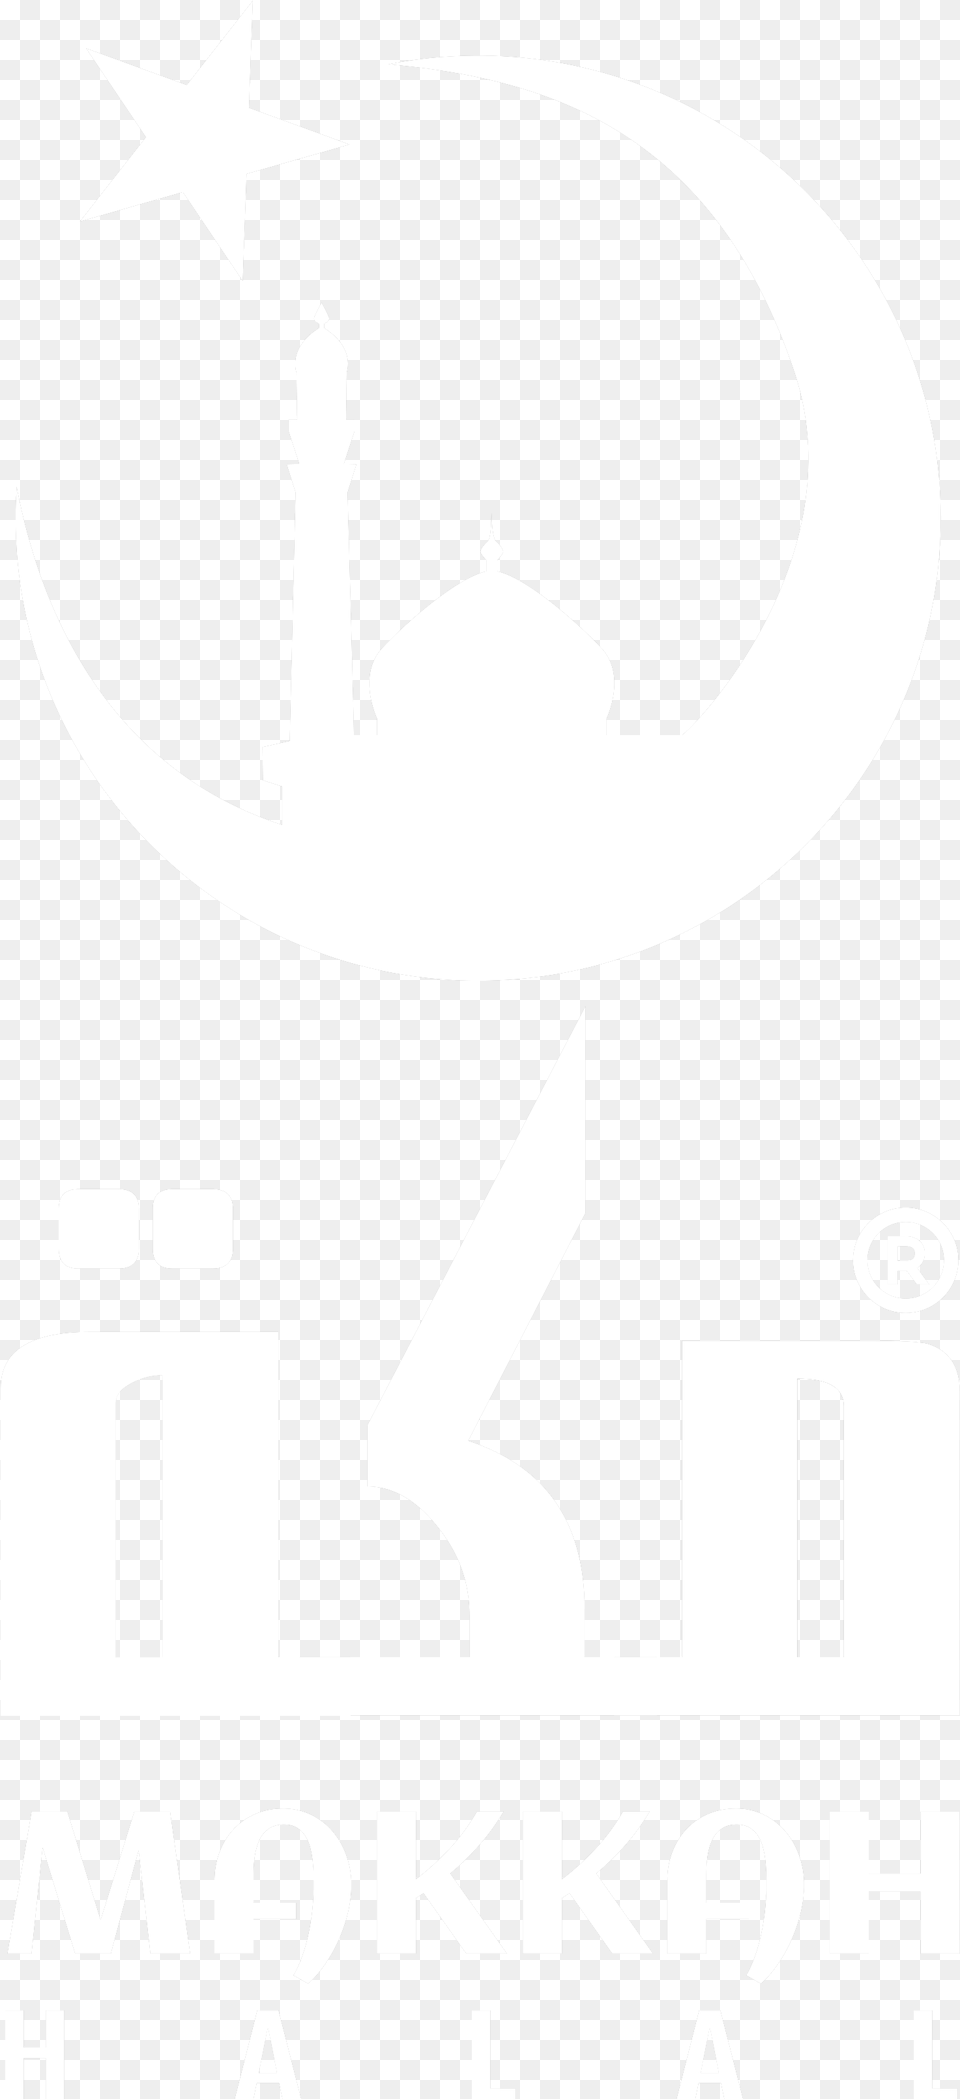 Makkah Halal Black And White Islamic Mosque, Stencil, Symbol Png